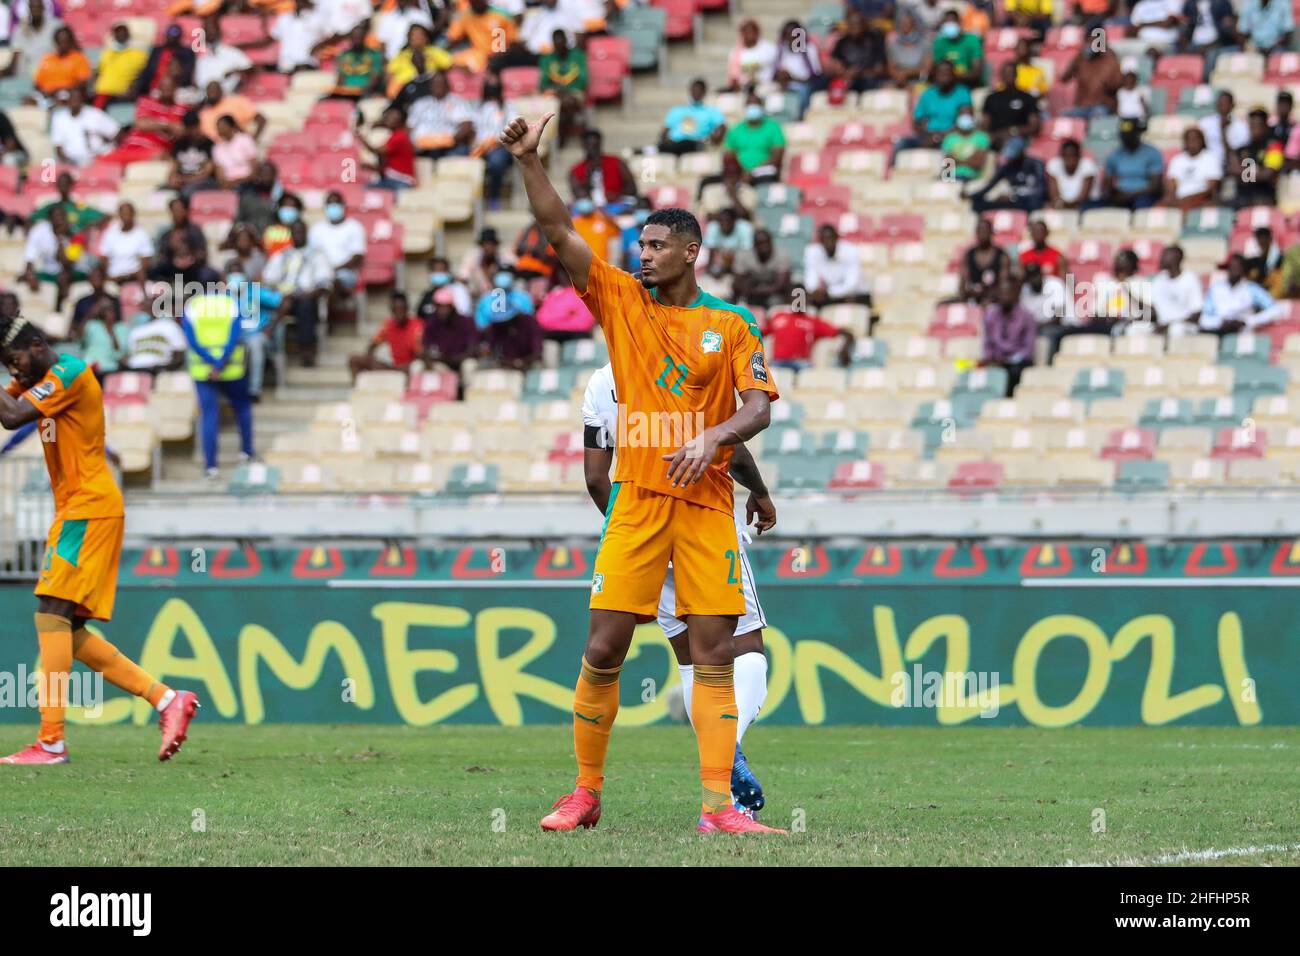 Douala, CAMEROON - JANUARY 16: Sebastien Haller of Ivory Coast during the Africa Cup of Nations group E match between Ivory Coast and Sierra Leone at Stade de Japoma on January 16 2022 in Douala, Cameroon. (Photo by SF) Credit: Sebo47/Alamy Live News Stock Photo